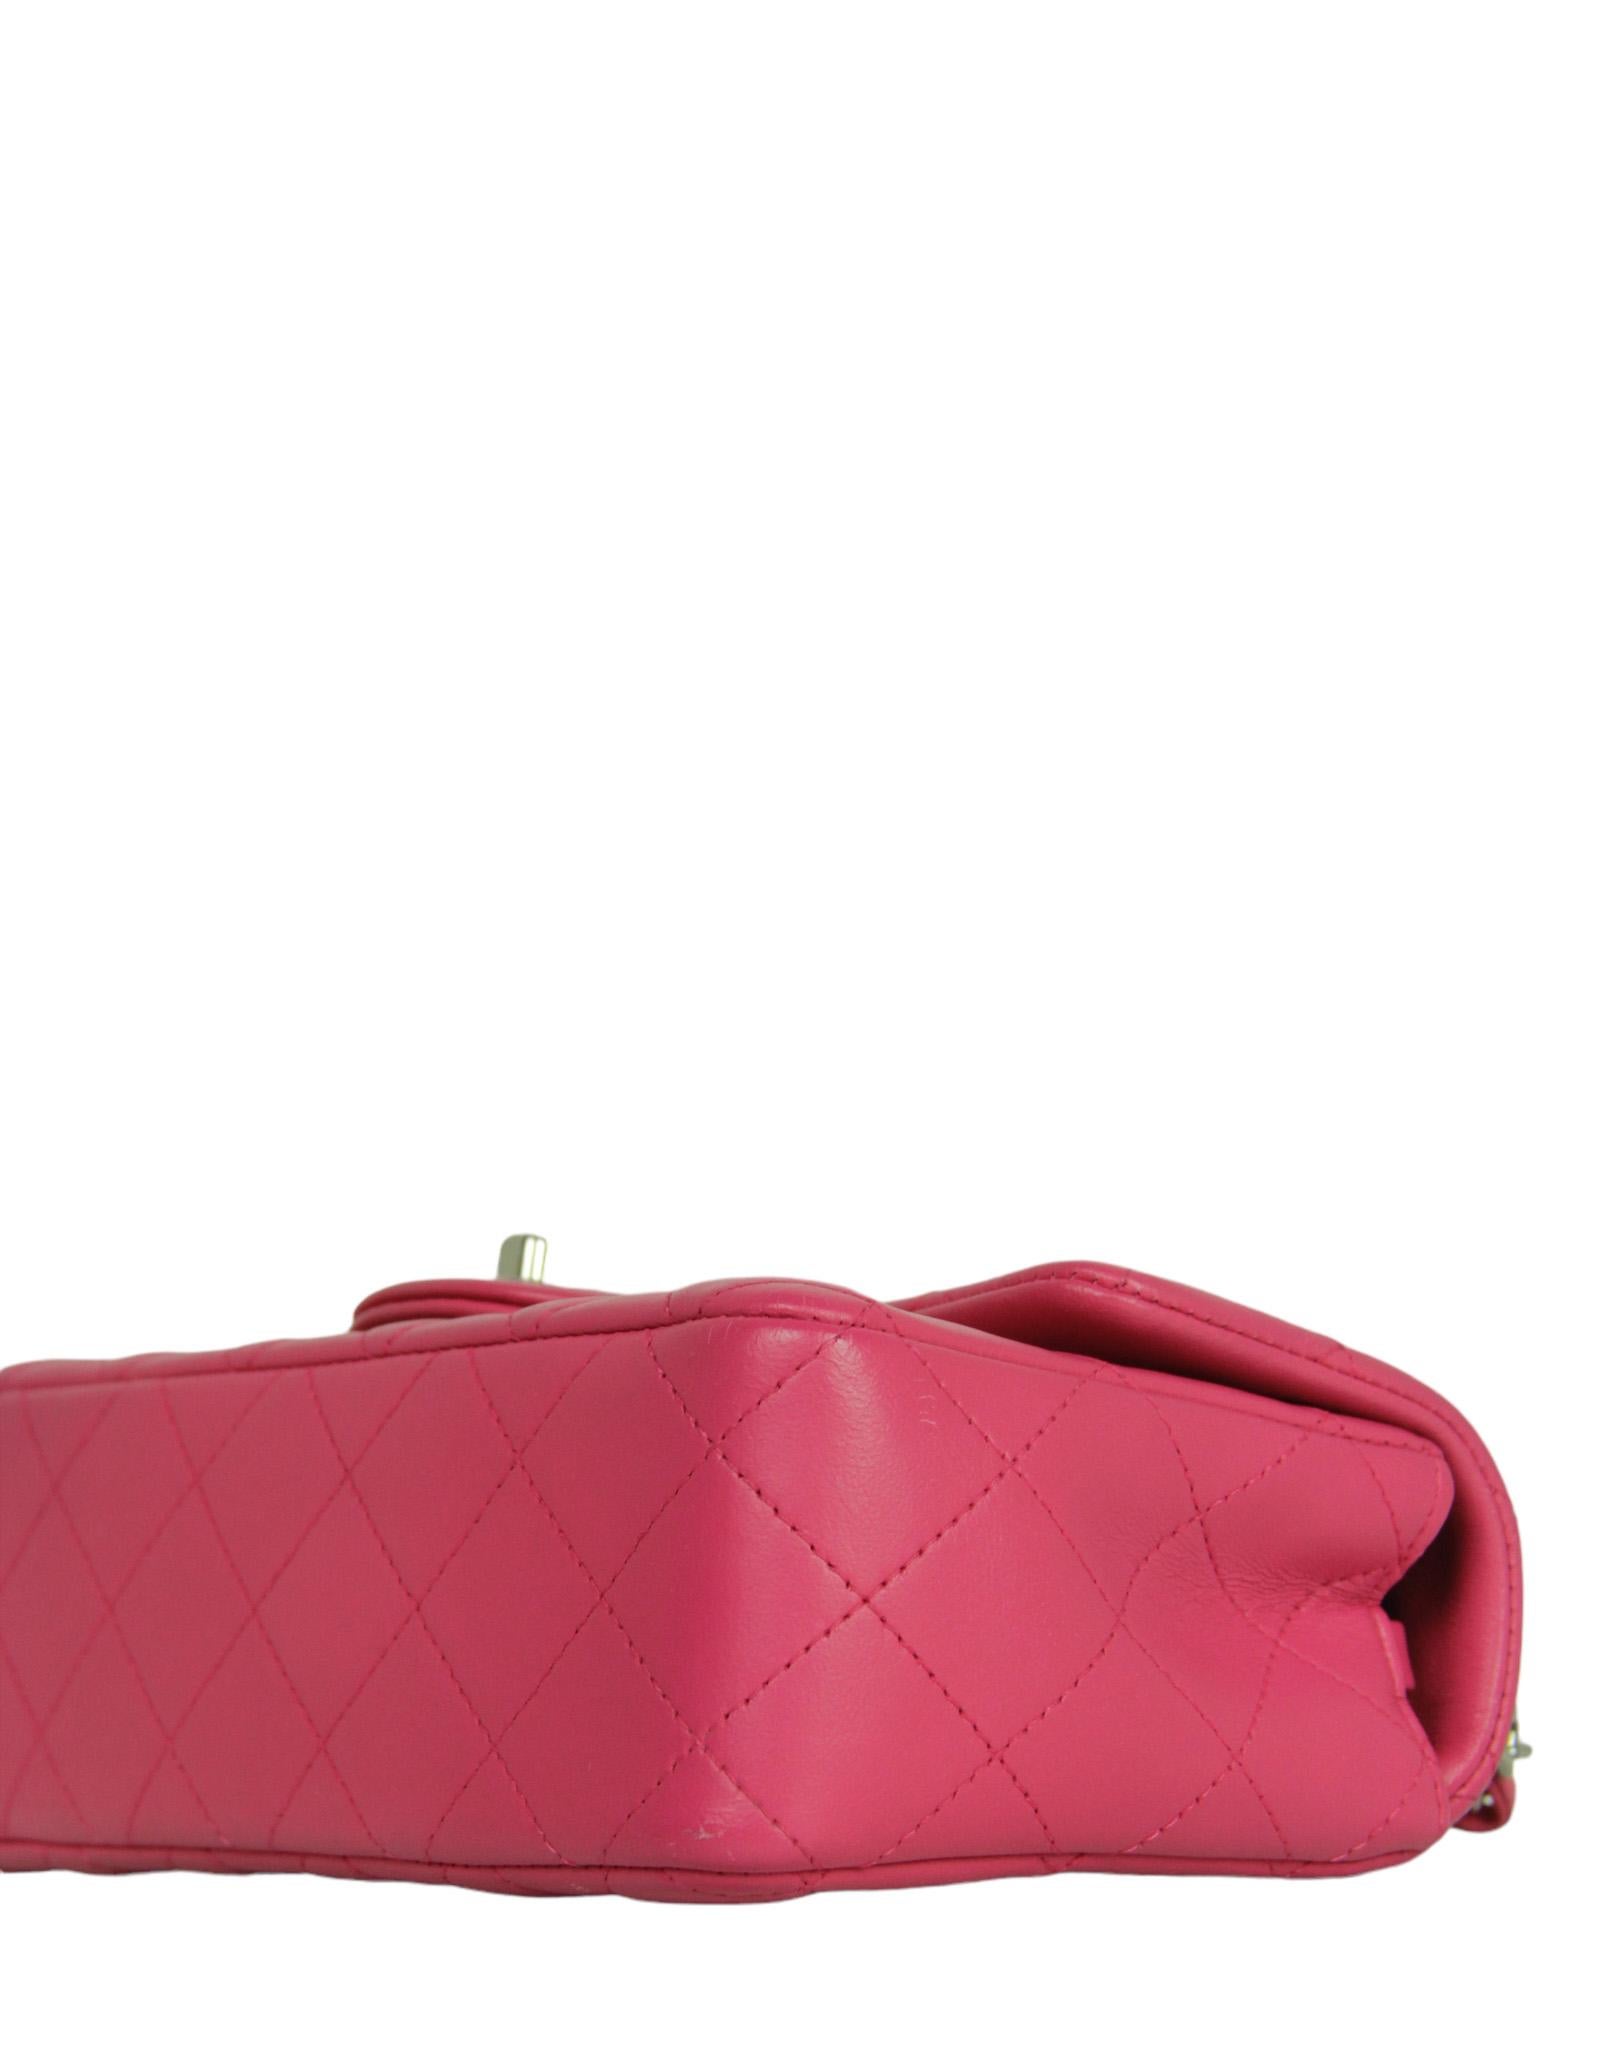 Women's Chanel Pink Lambskin Leather Quilted Rectangular Mini Flap Bag For Sale